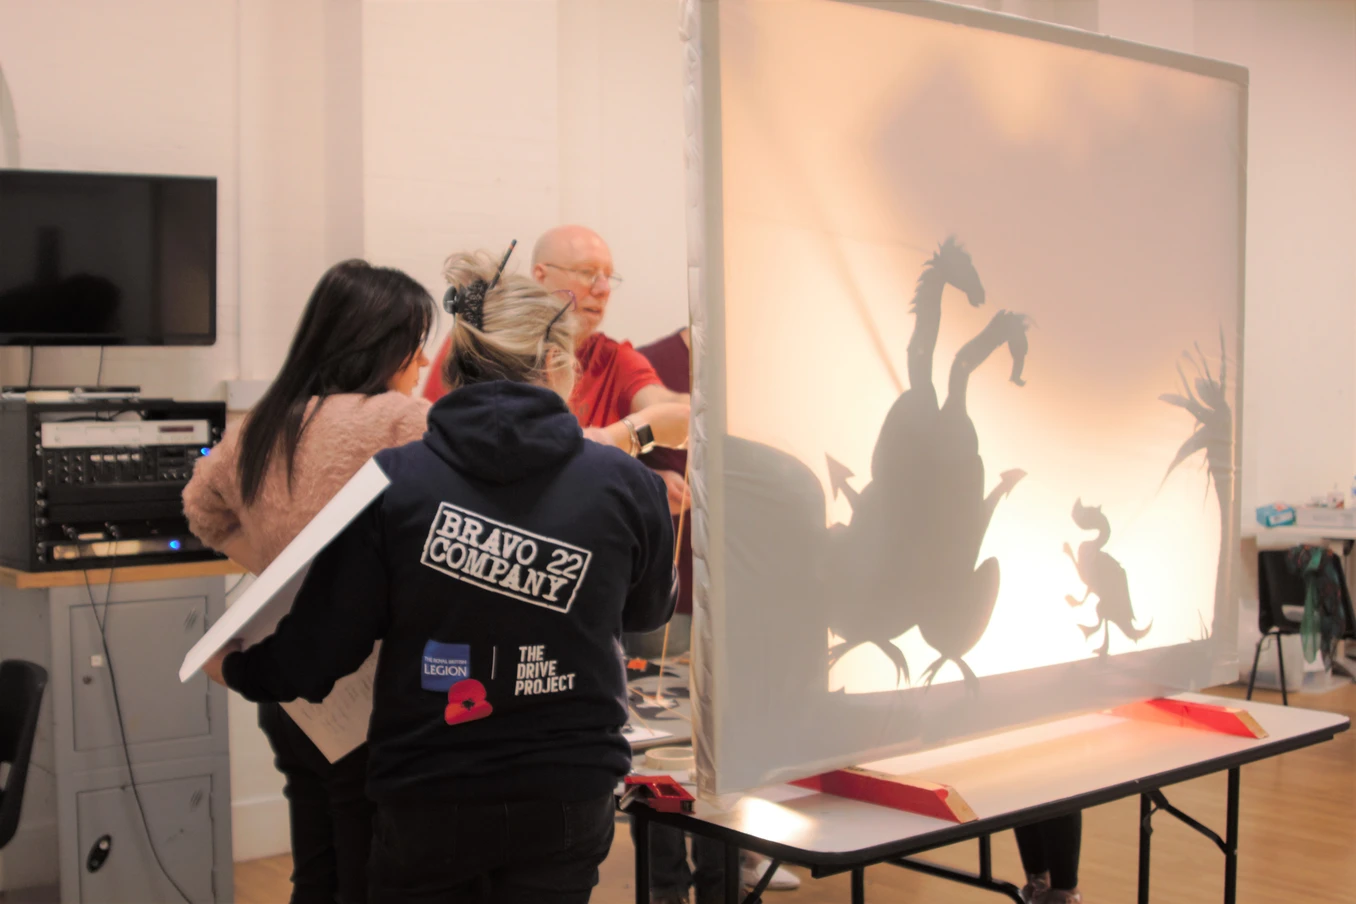 Shadow puppetry workshop in London 2019.